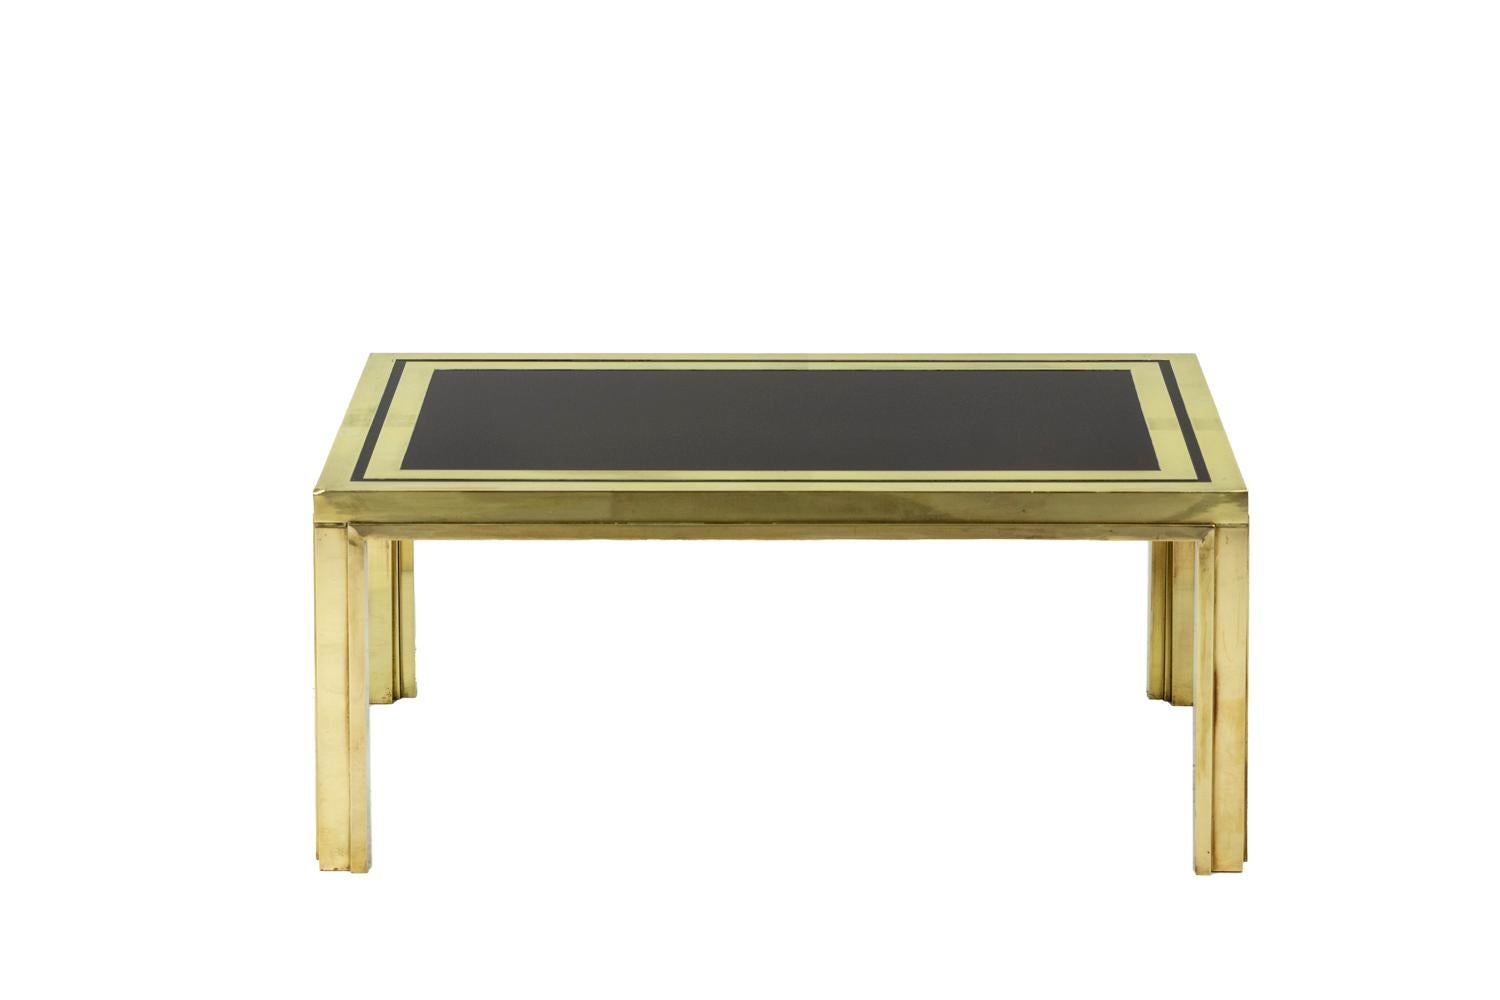 Italian Maison Iiwans, Pair of End Tables in Gilt Brass, 1970’s For Sale